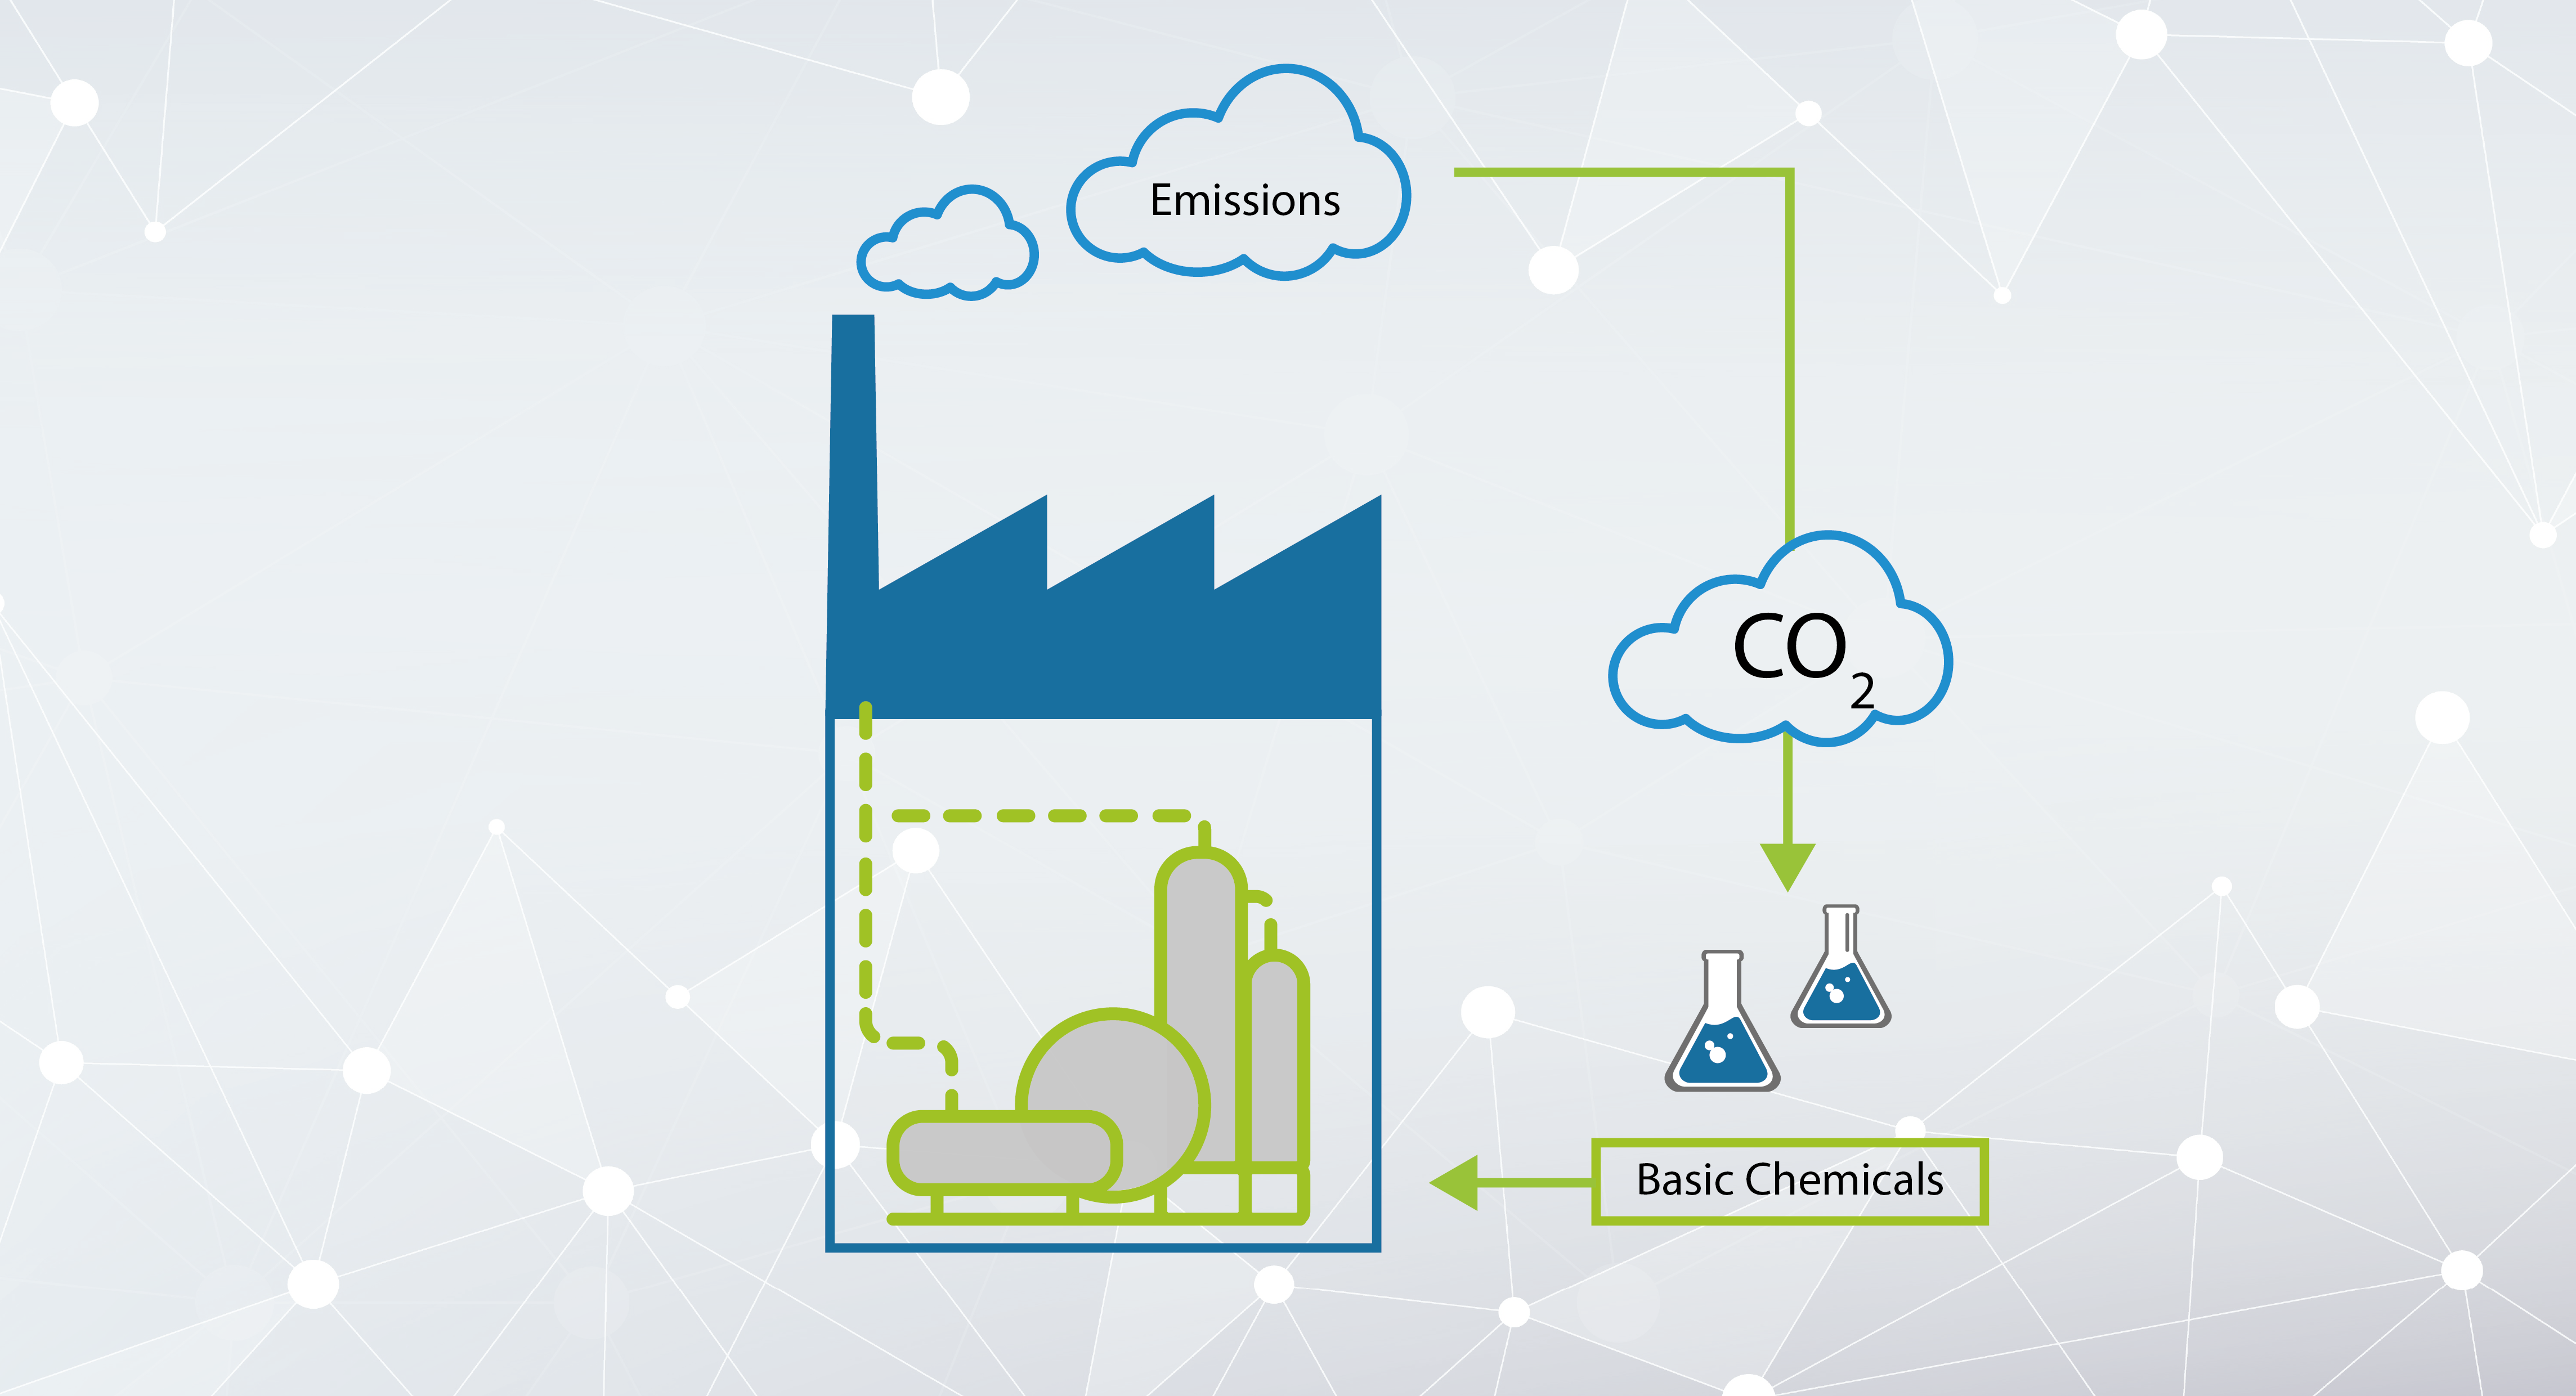 Material use of CO2 is an important step towards climate neutrality. The picture visualizes the cycle from emissions, via CO2 sequestration, to the feed-in of basic chemicals. 